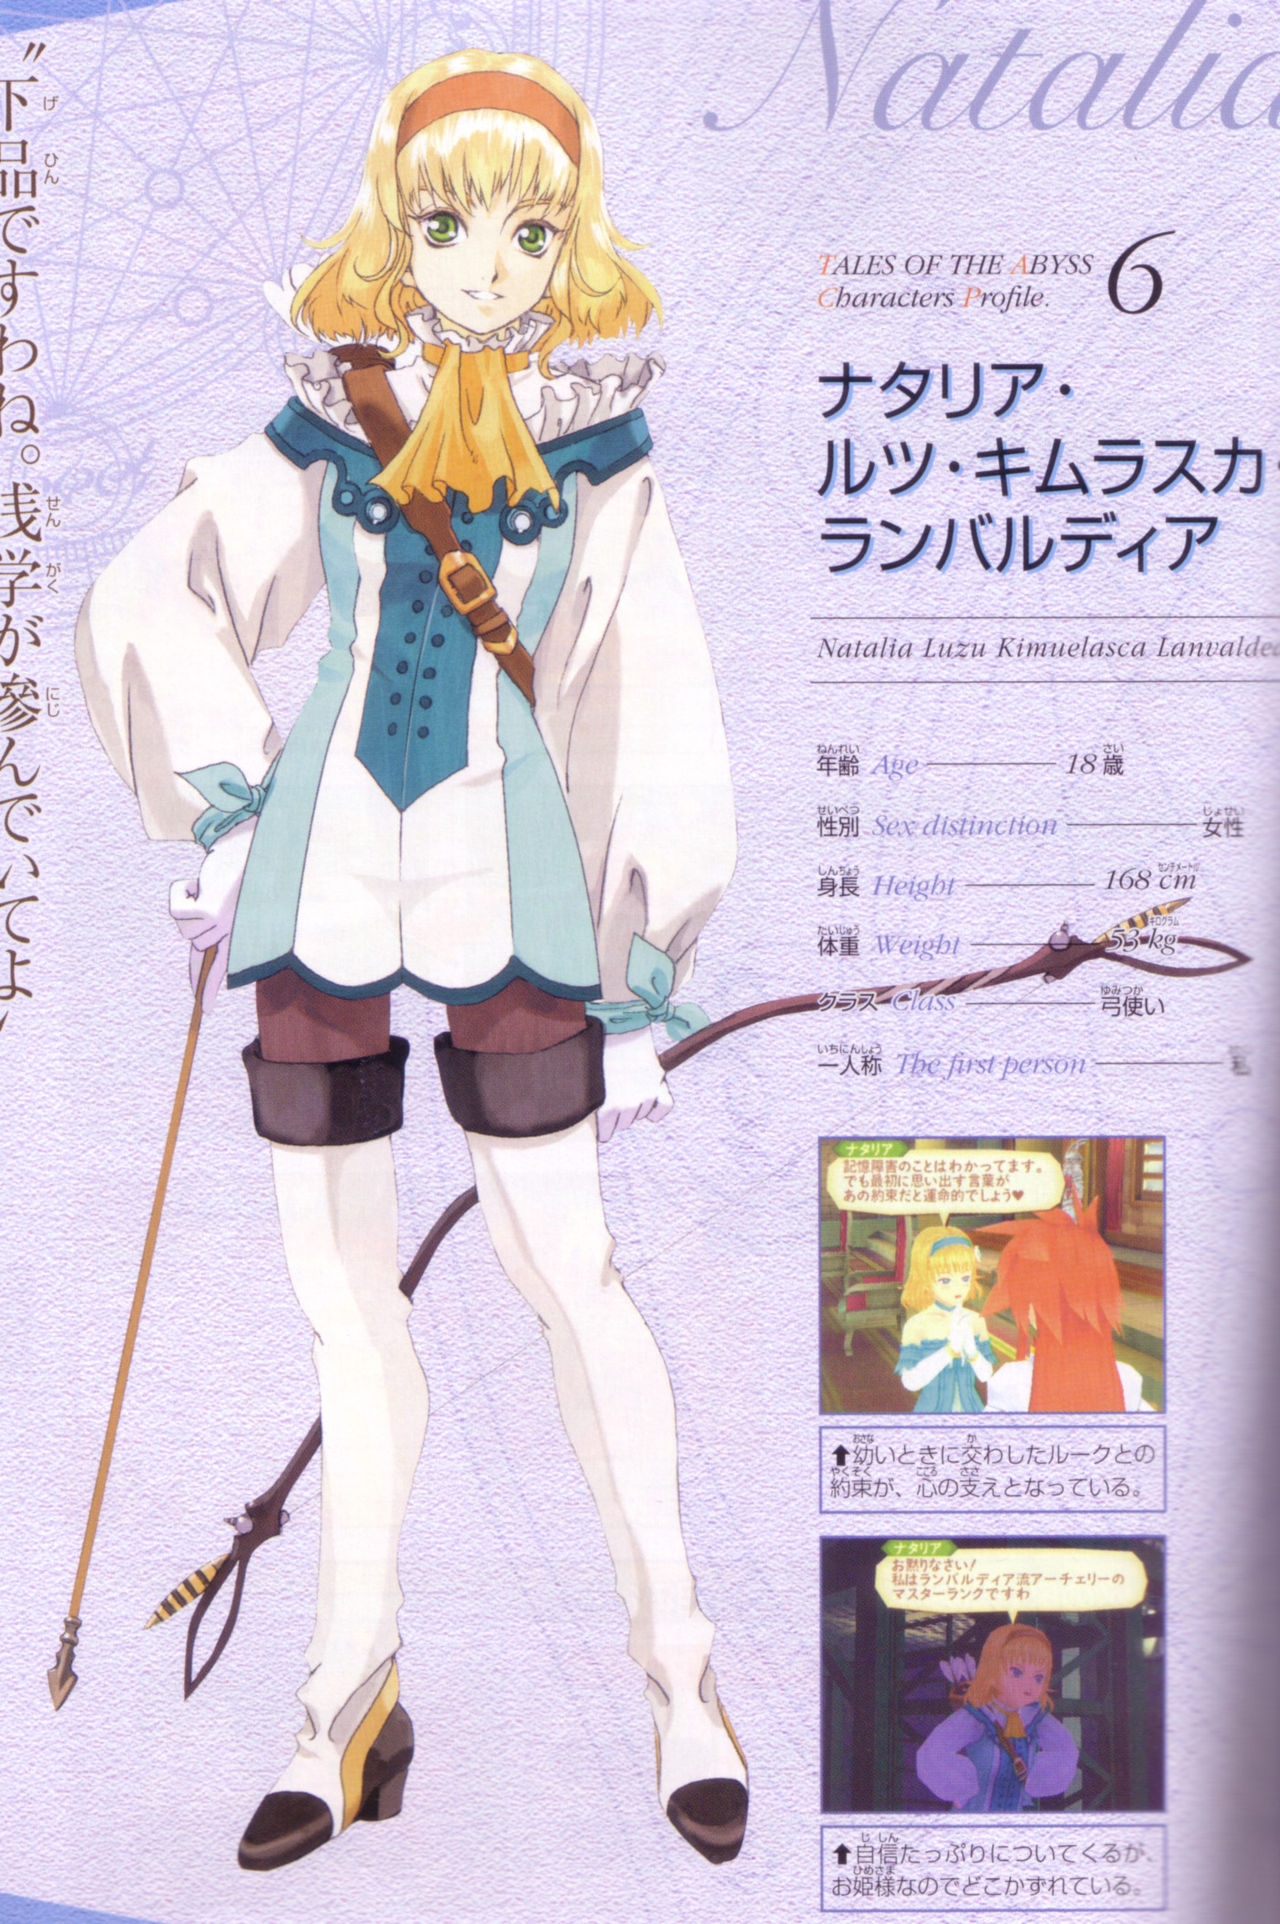 Tales of Abyss Artbook 6